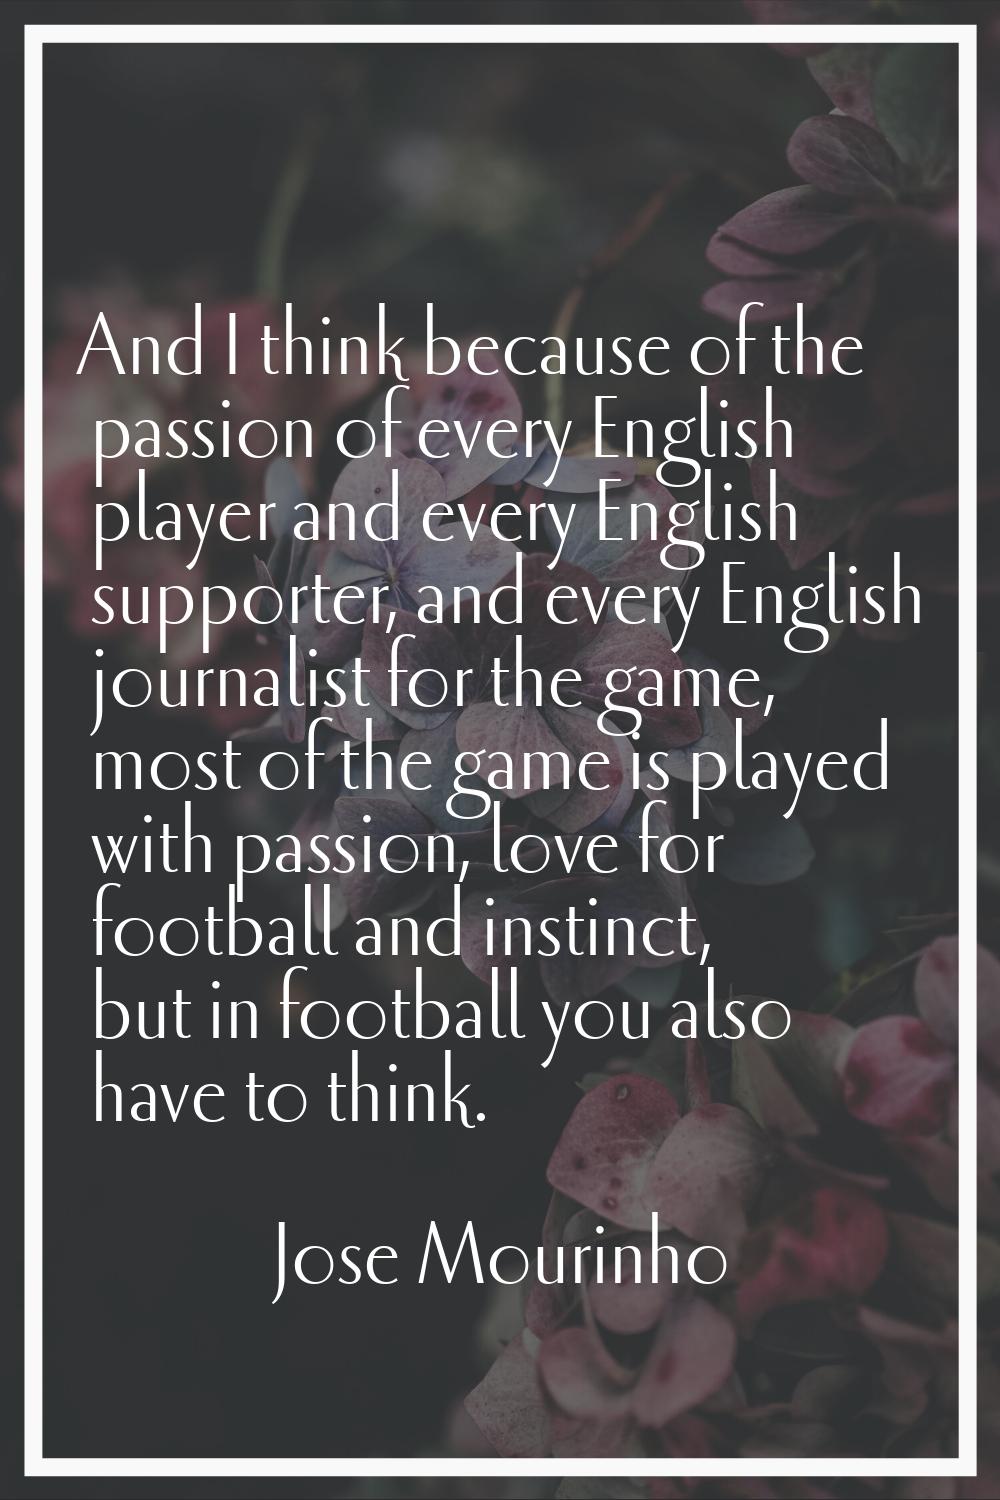 And I think because of the passion of every English player and every English supporter, and every E